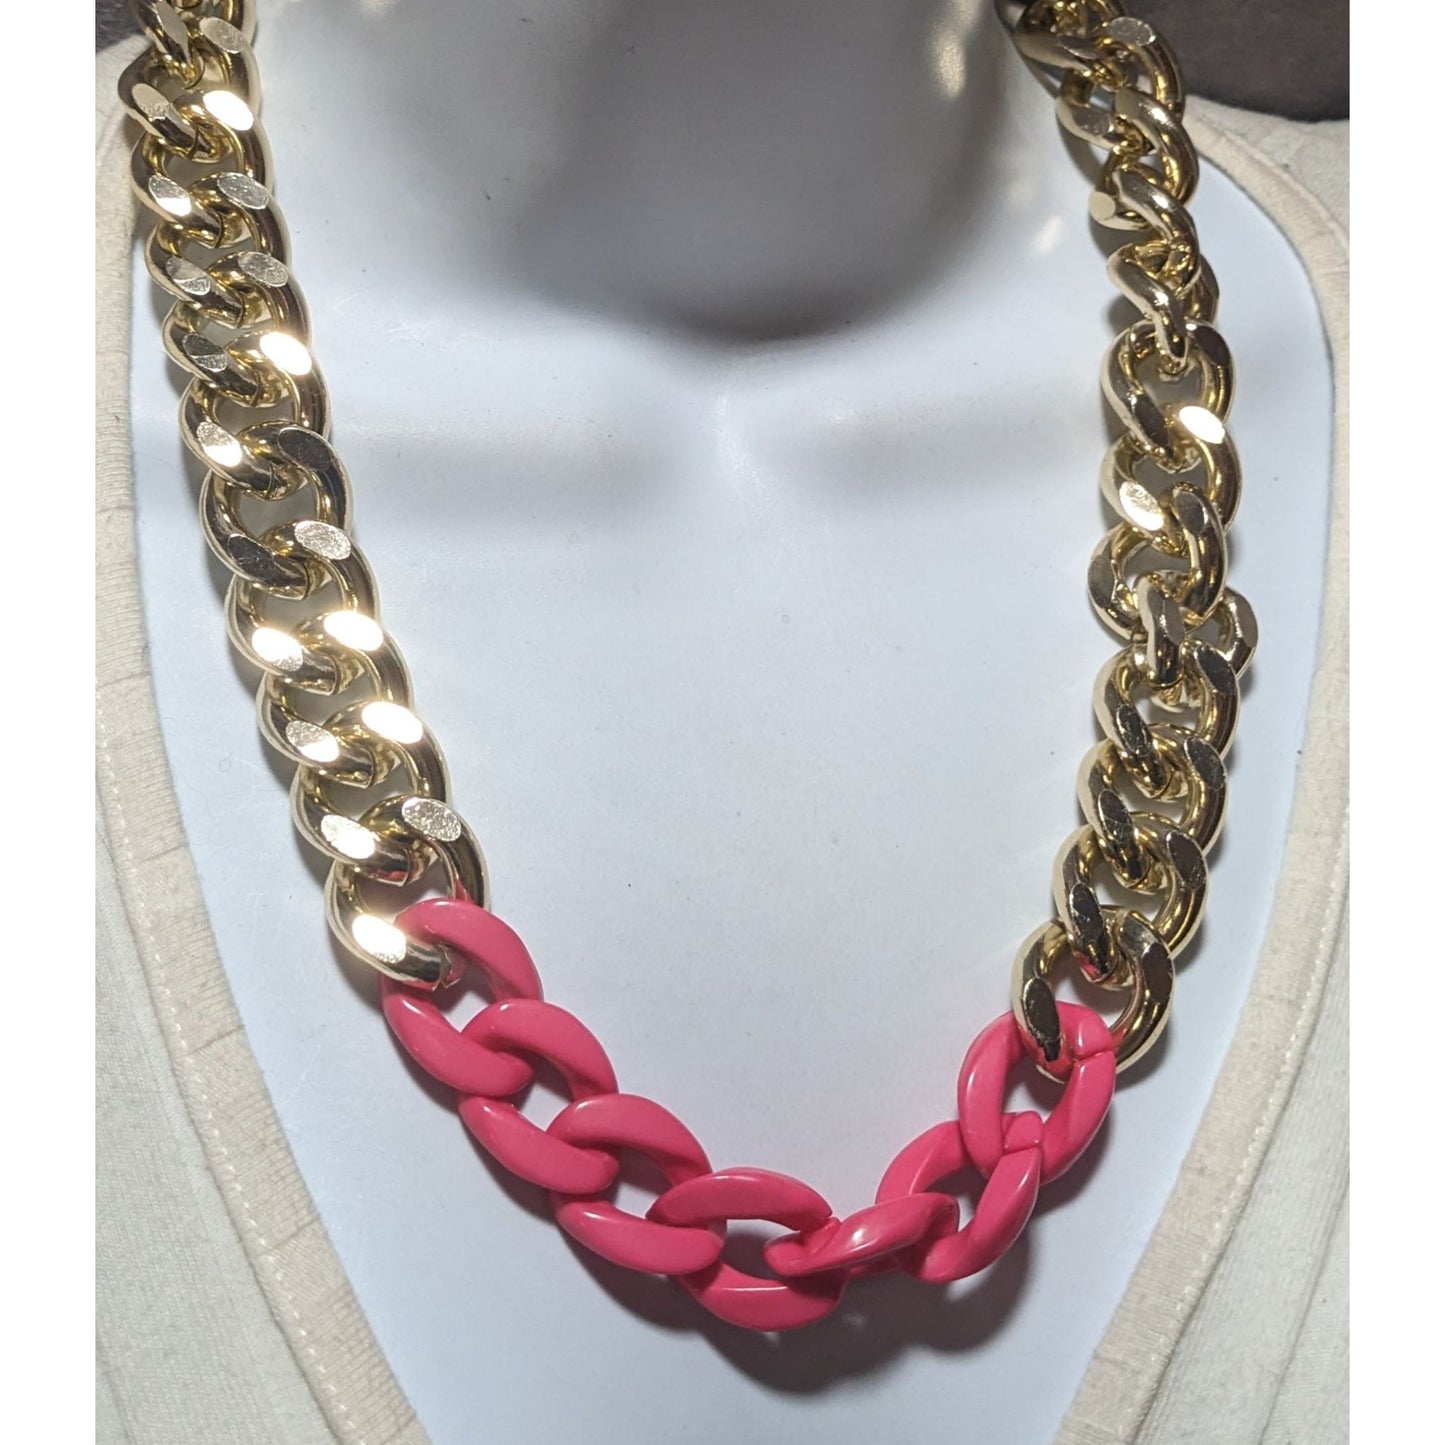 Chunky 80s Gold & Pink Chain Necklace